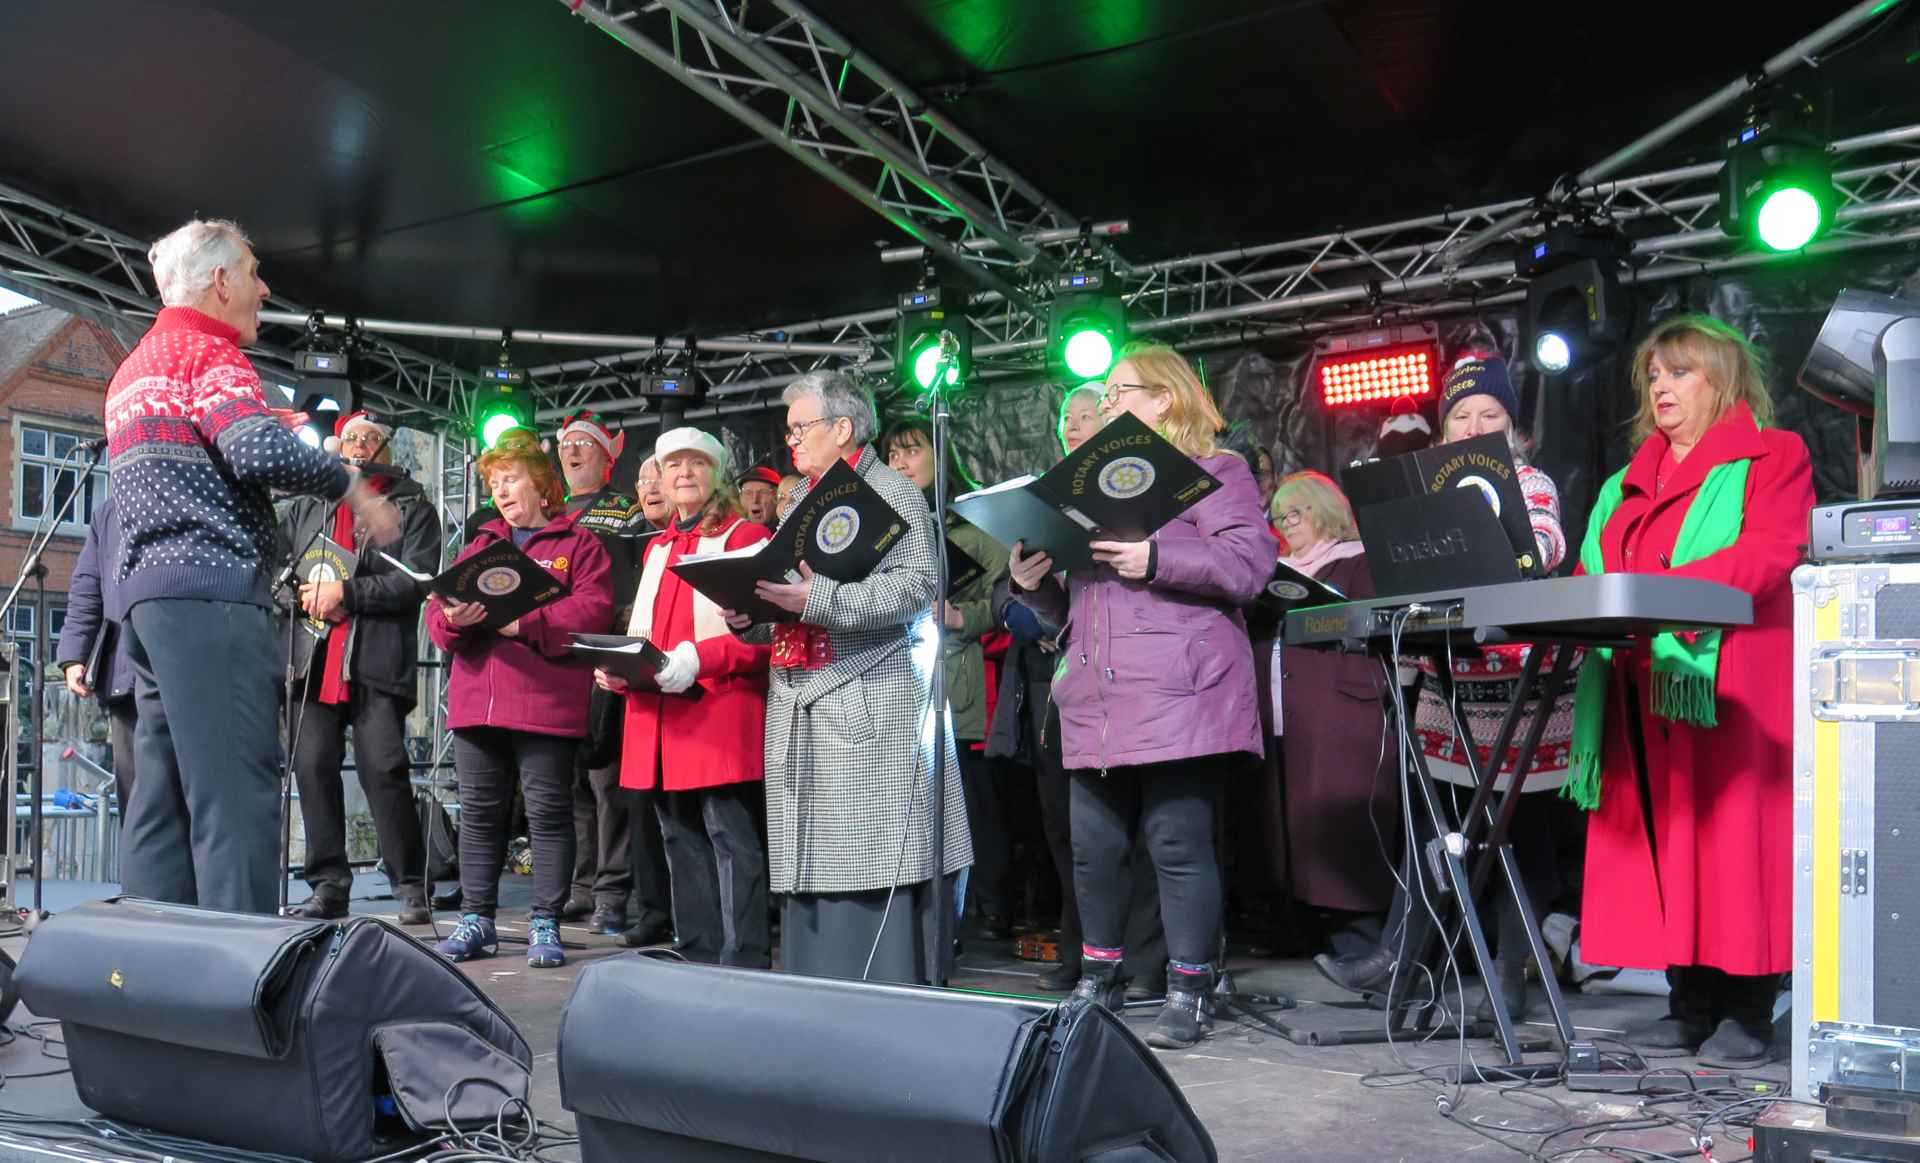 A choir singing on stage holding their hymn books with a conductor leading them.